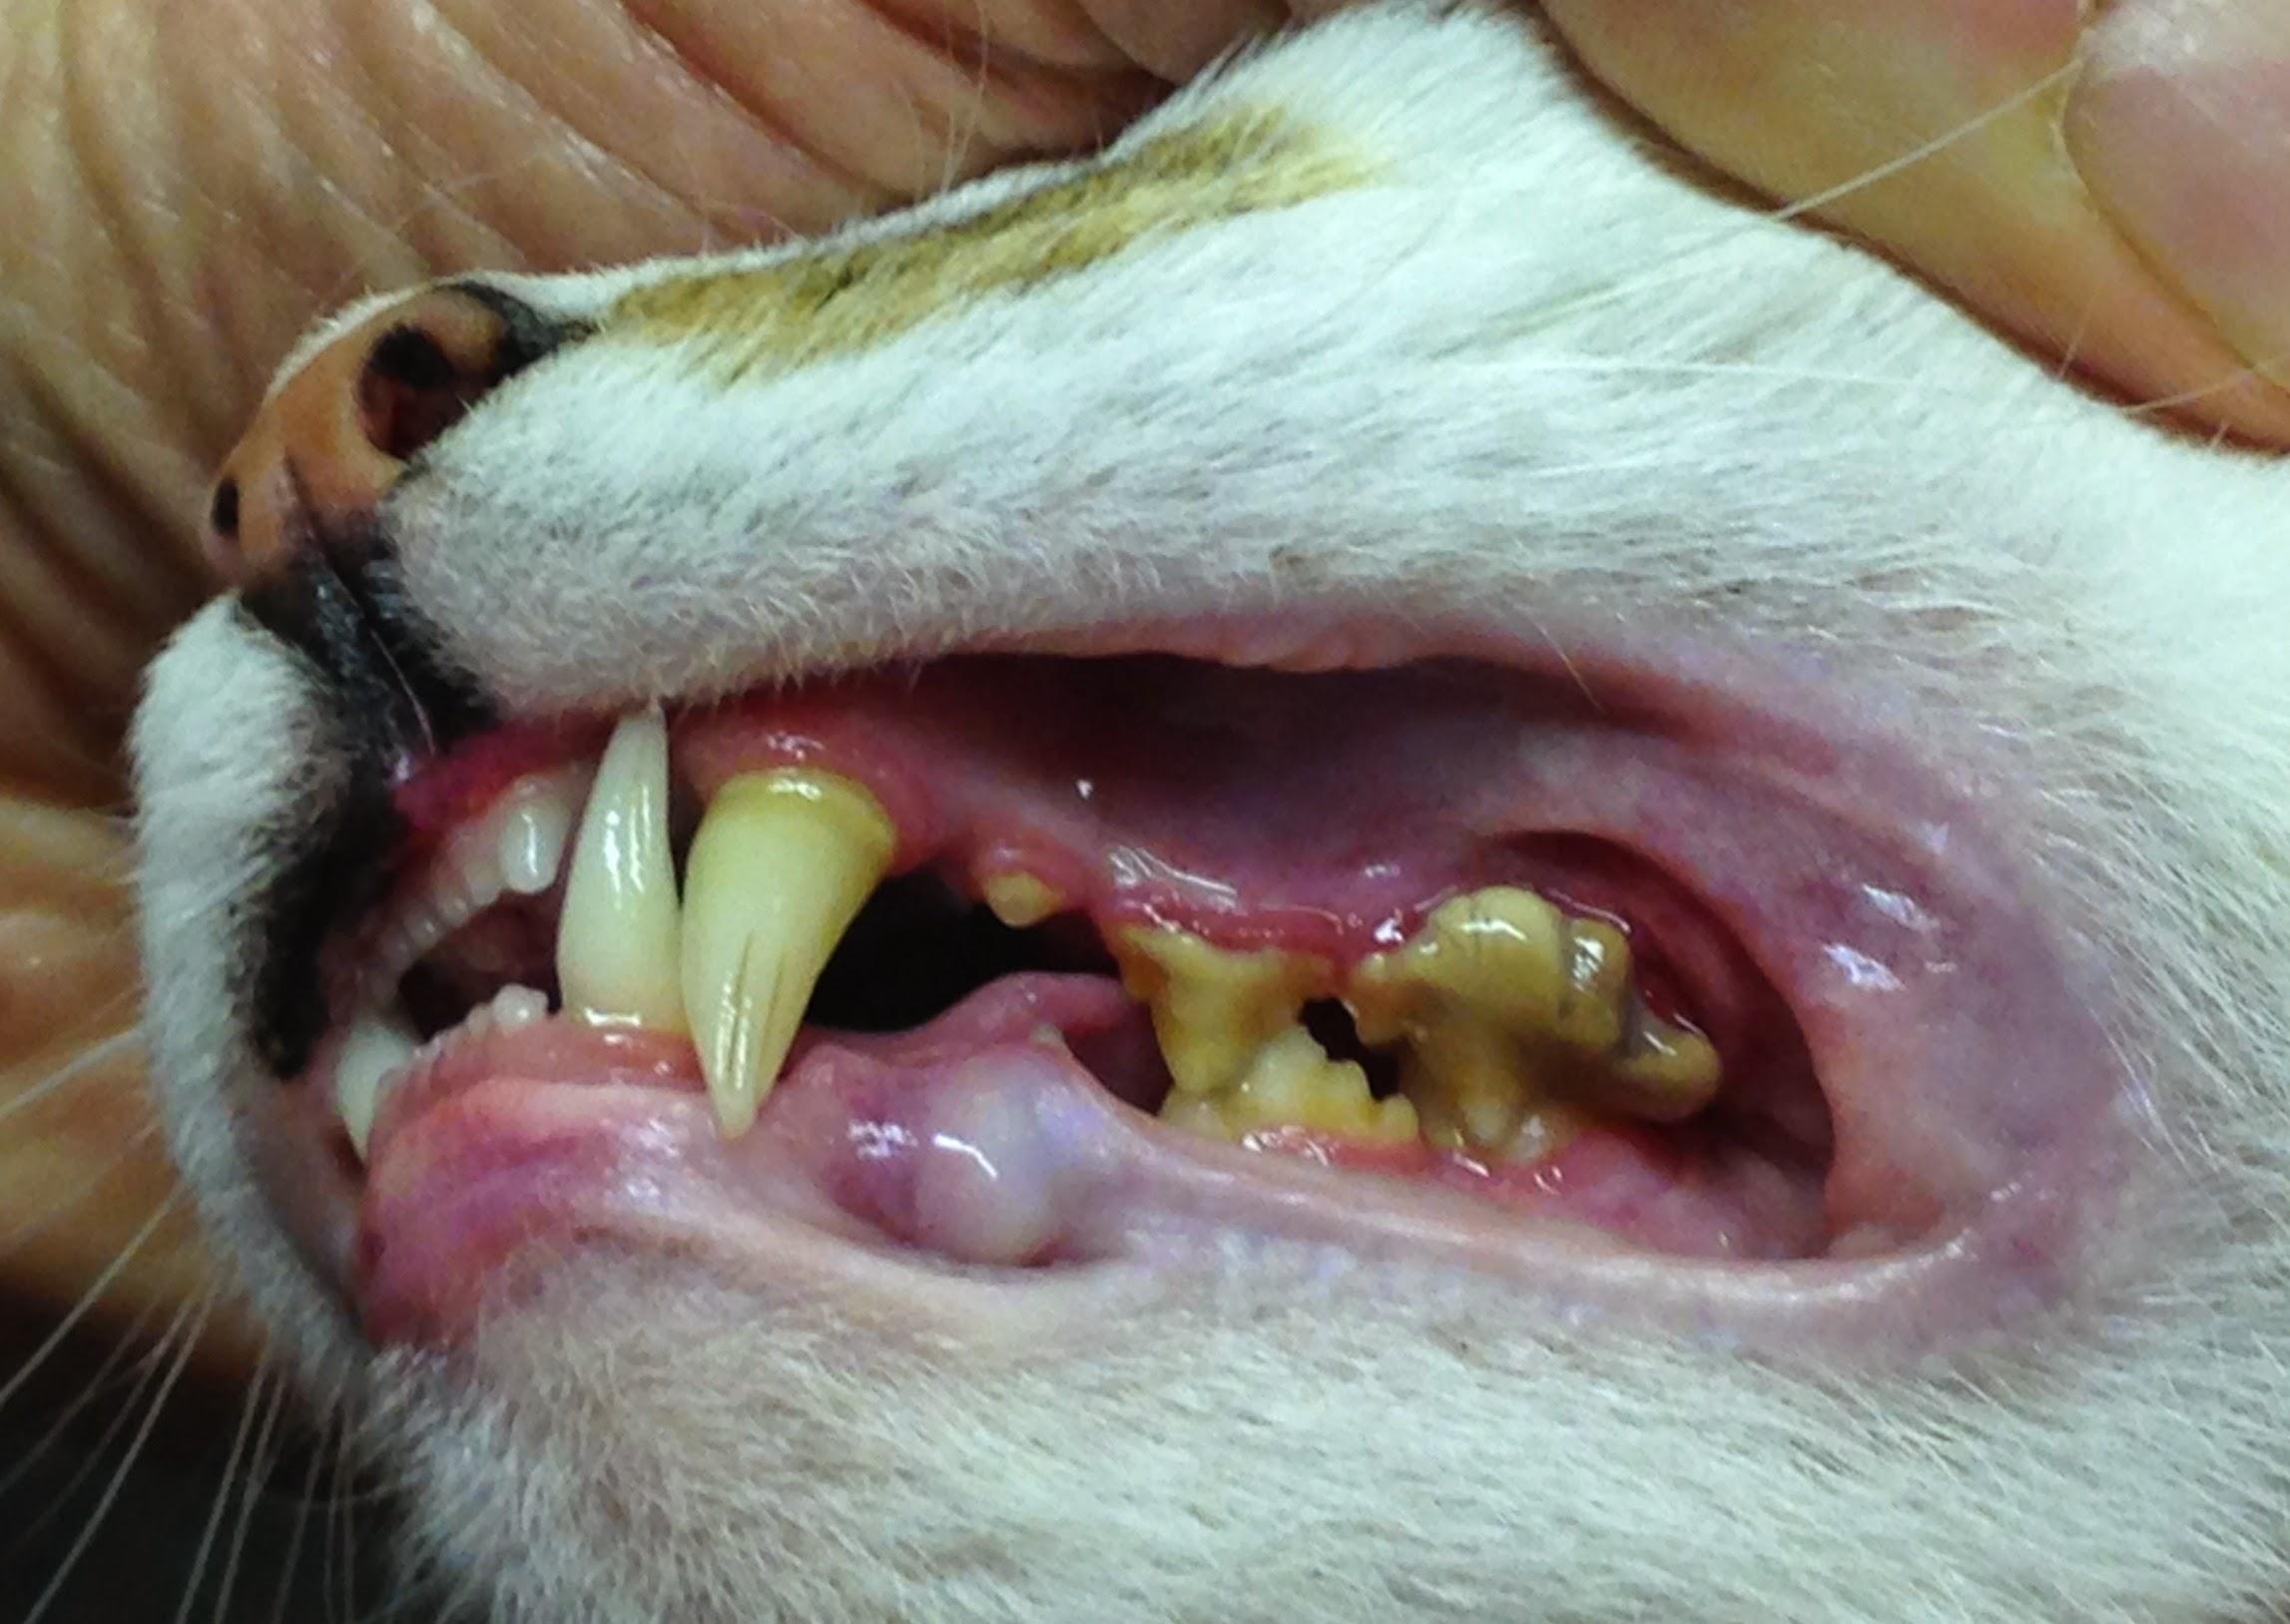 53 Top Pictures Cat Bad Teeth Symptoms - Is Bad Breath A Sign Of Dental Disease In Dogs And Cats ...